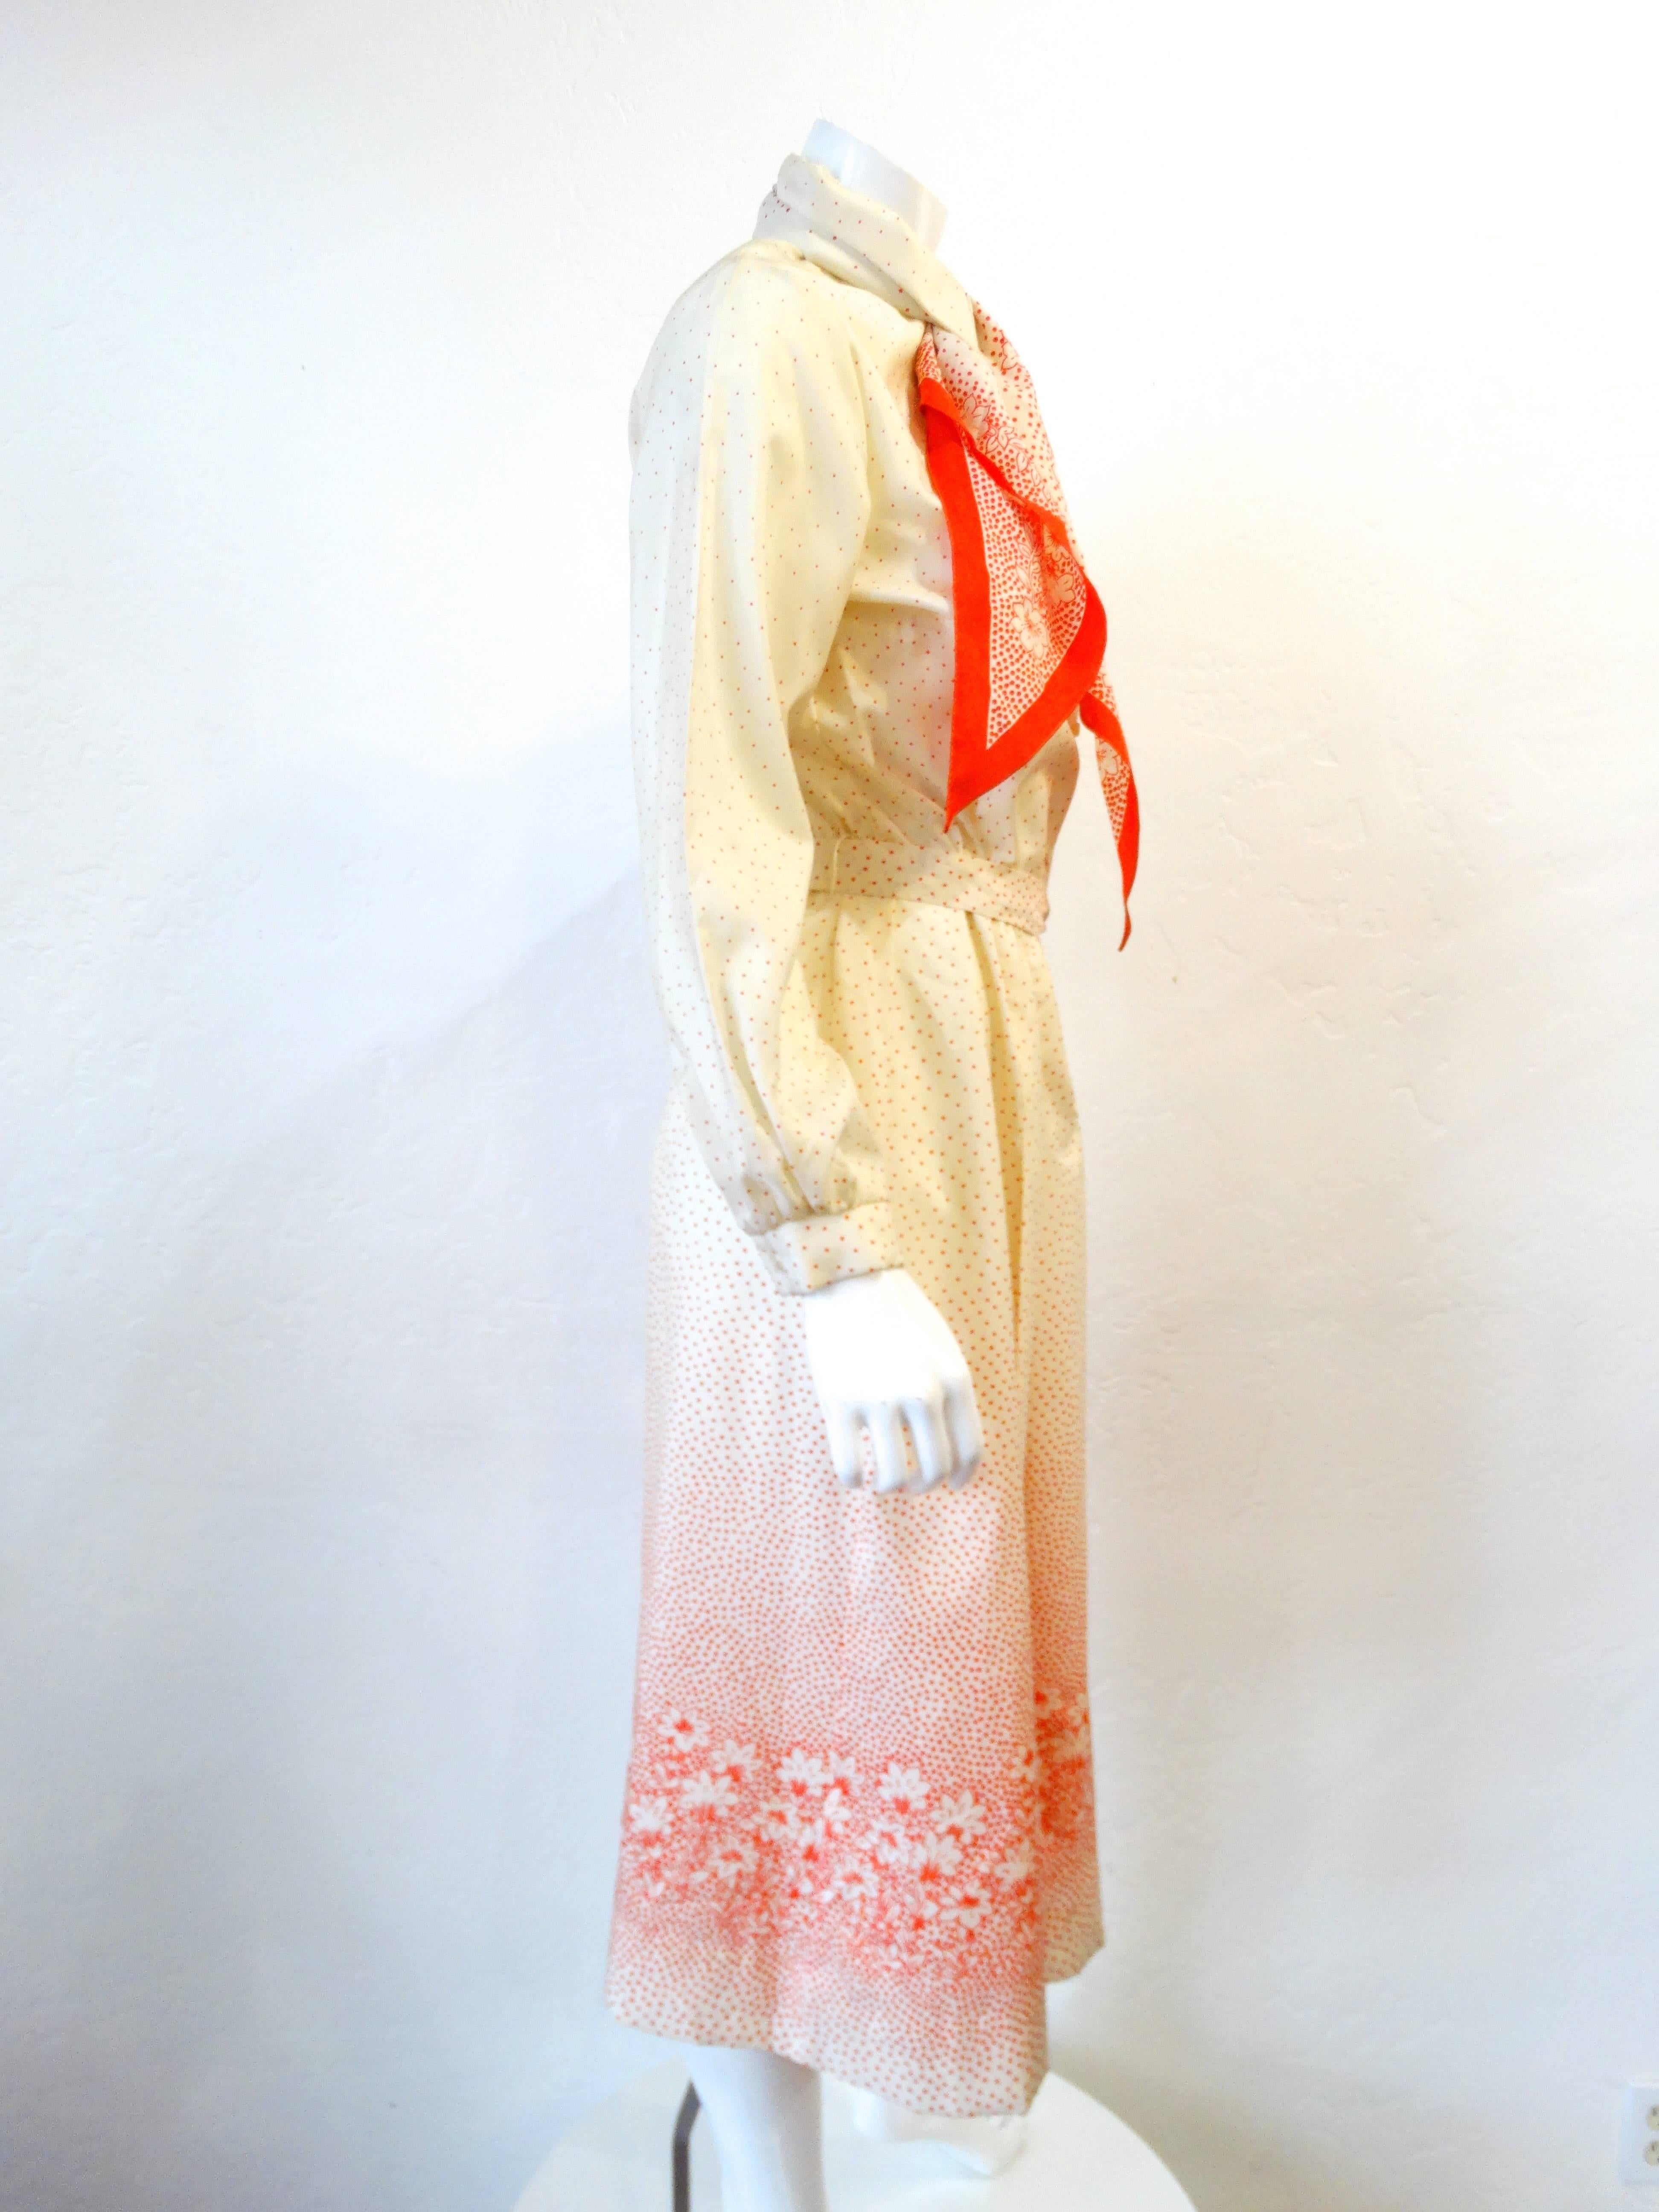 1960s Lanvin Cream & Red Polkadot Floral Dress In Excellent Condition For Sale In Scottsdale, AZ